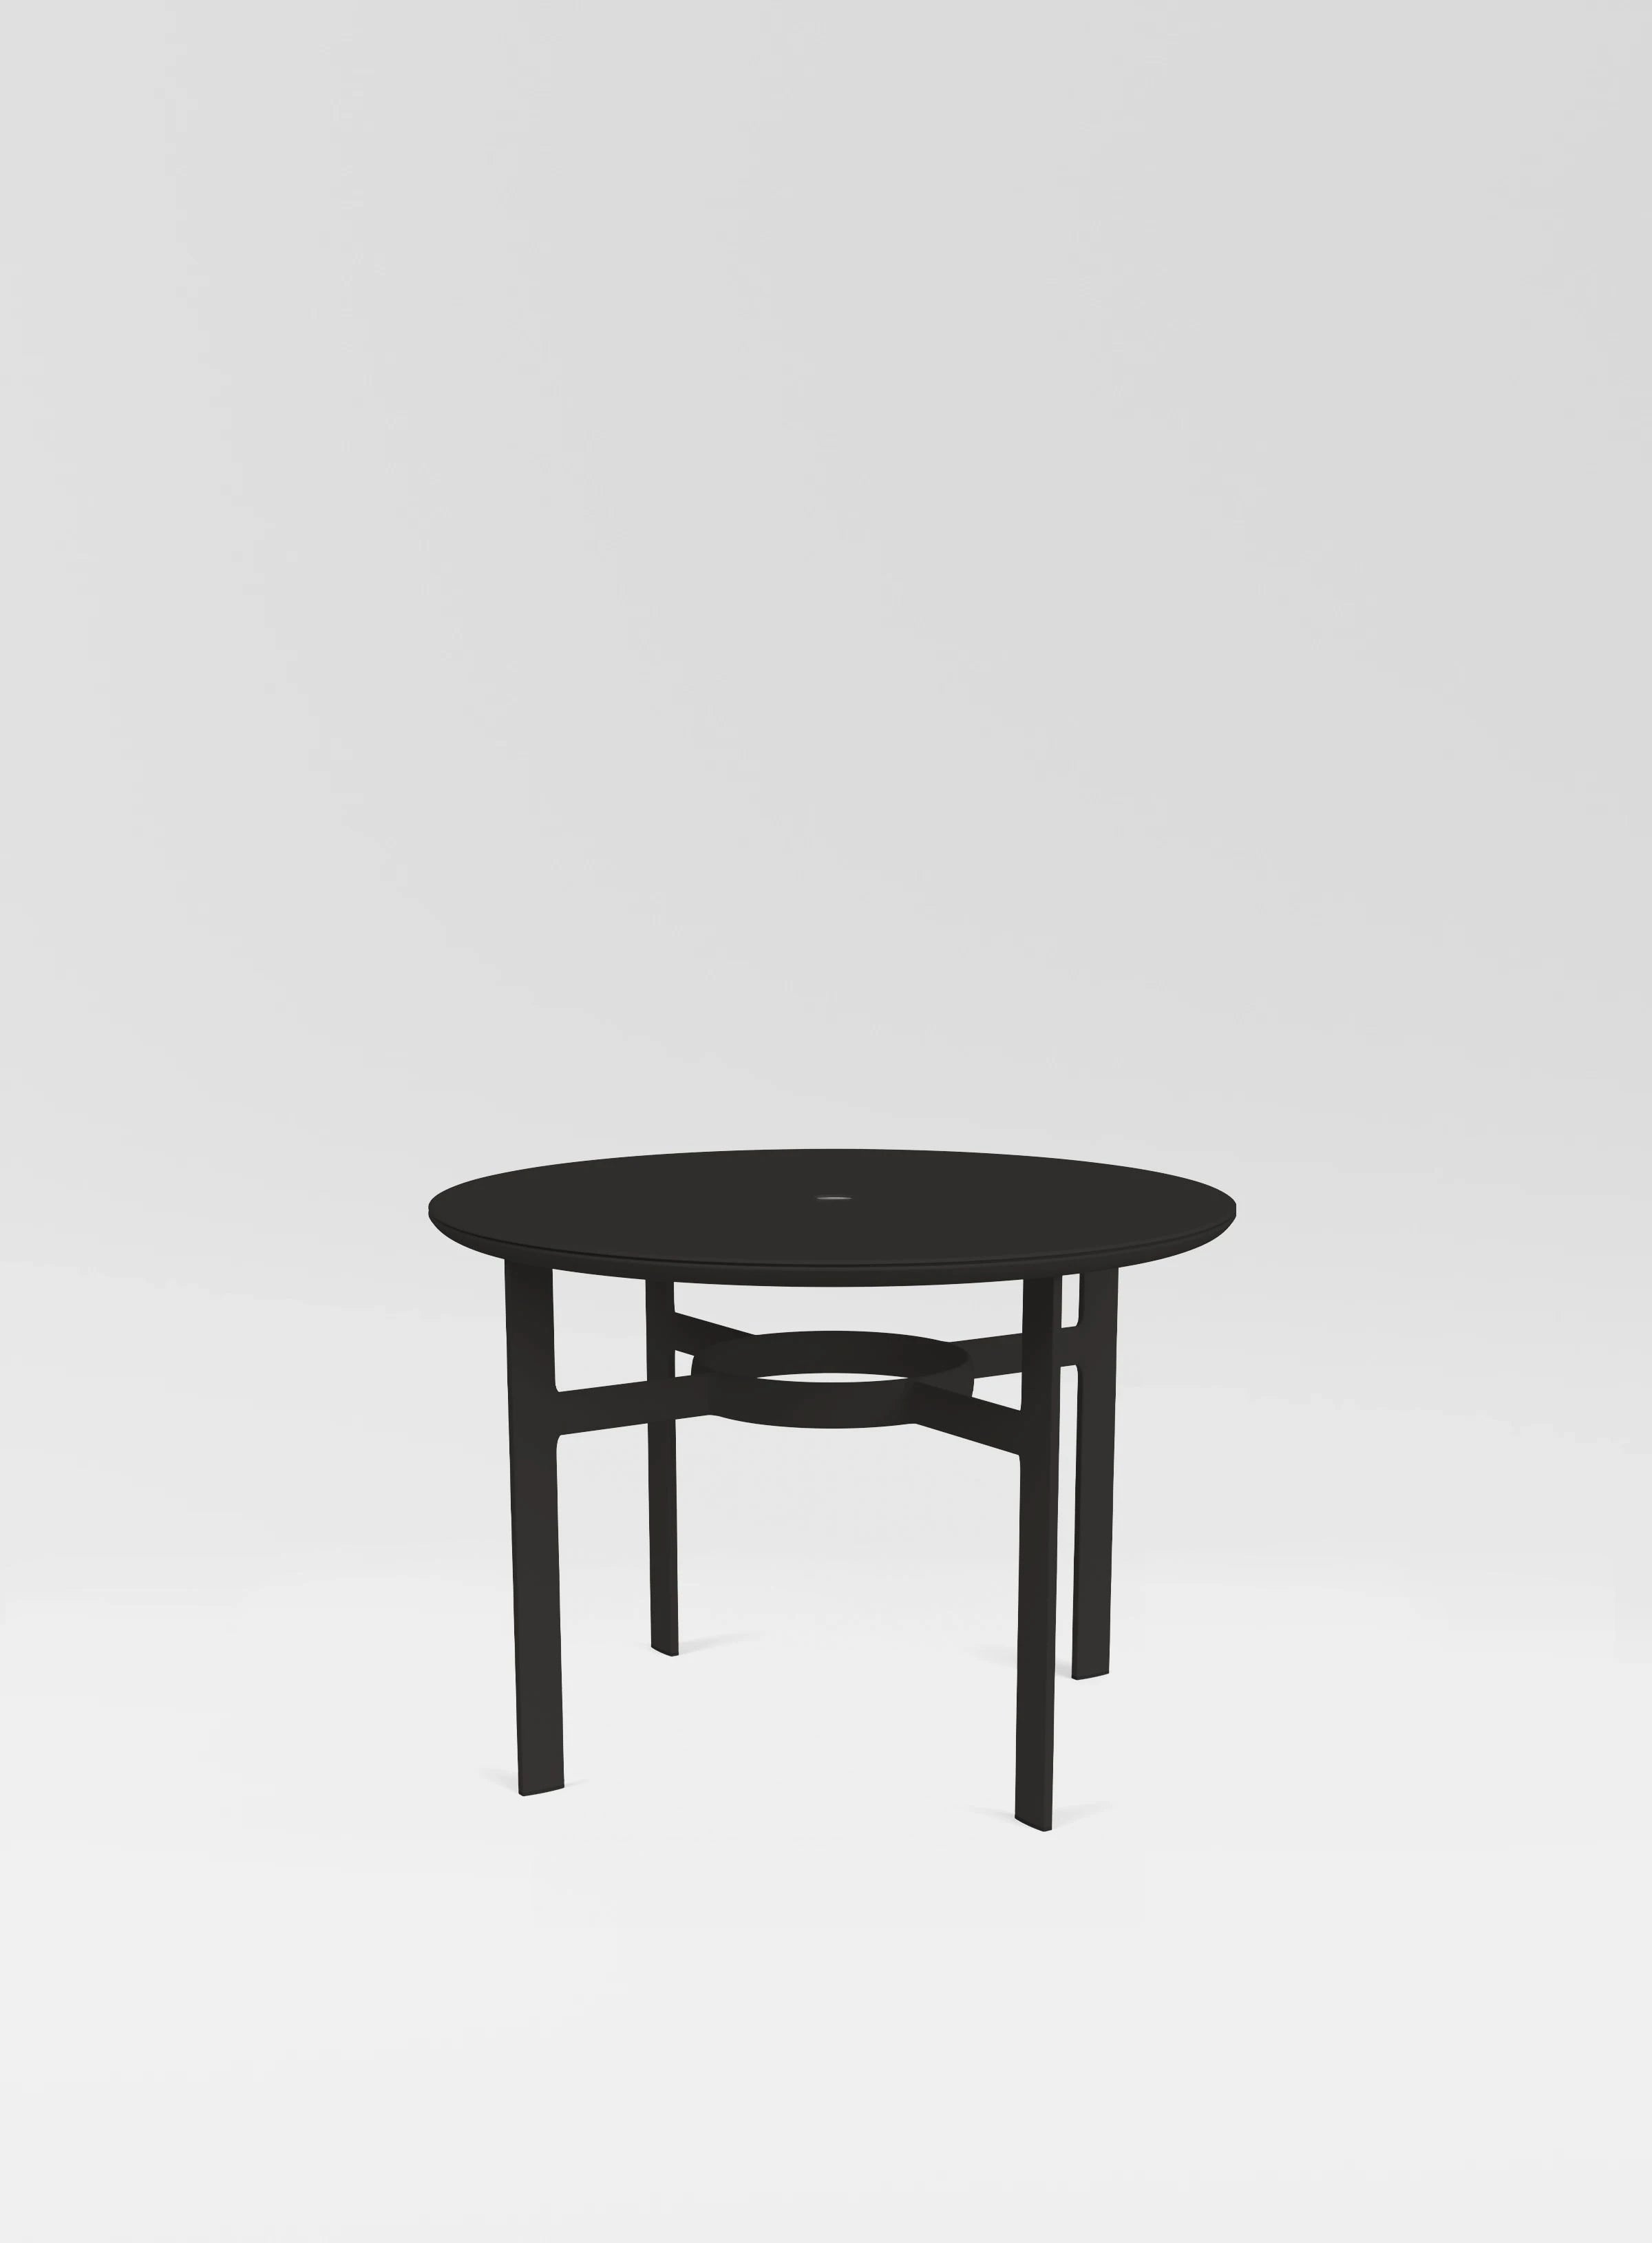 Parkway 42" Round Dining Table w/ Umbrella Hole by Brown Jordan